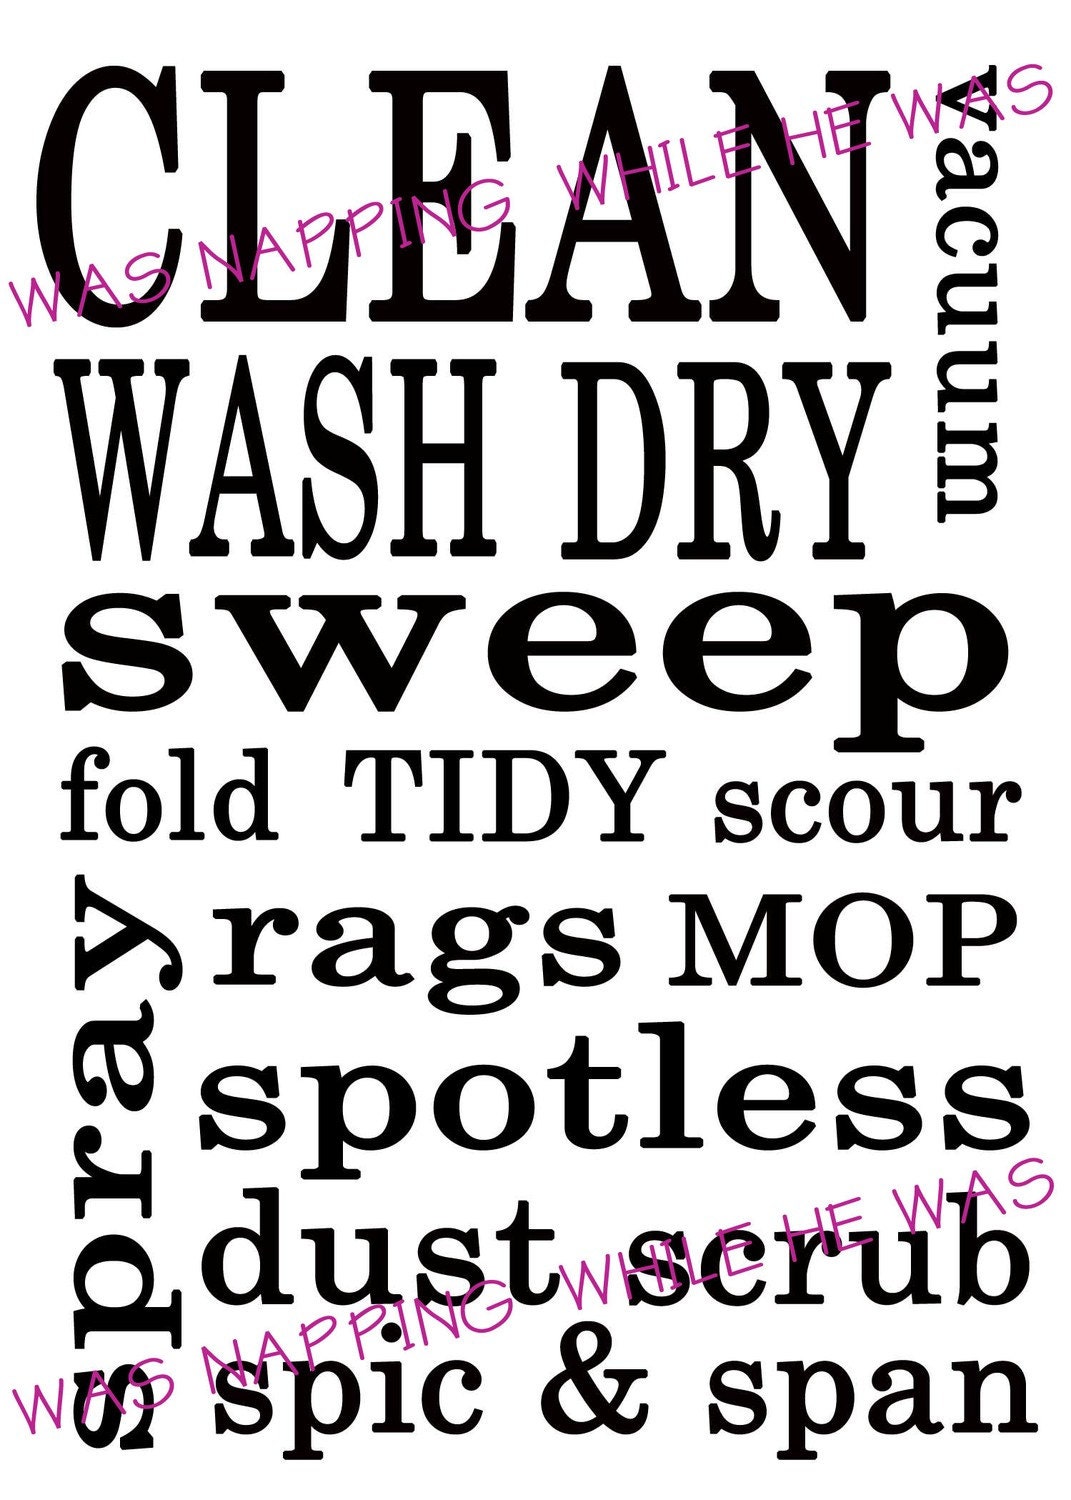 Cleaning Themed Subway Art Printable - Great Home Decor